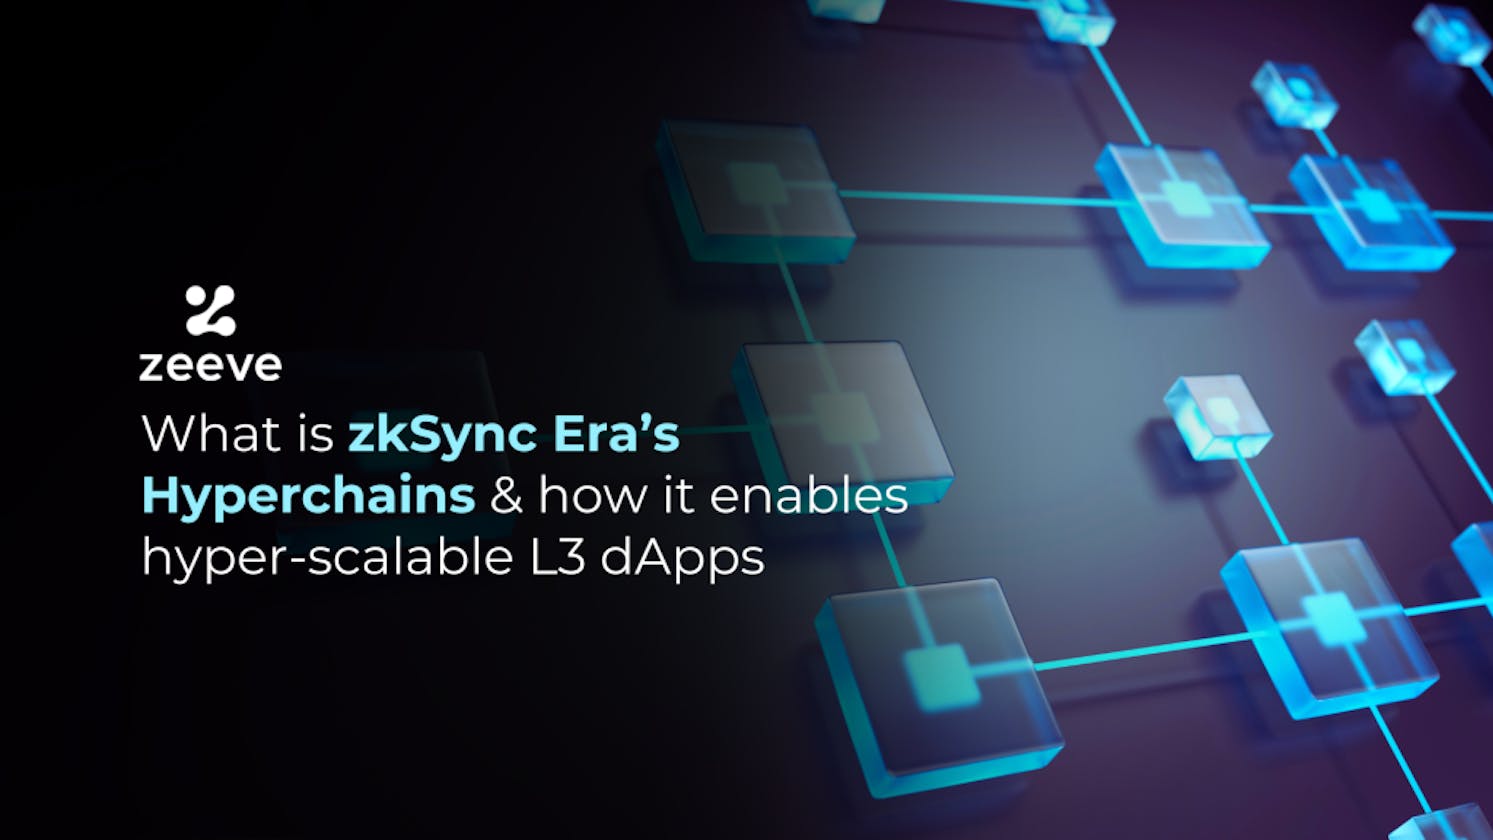 What are zkSync Hyperchains & how they bring hyper scalability to L3 dApps?